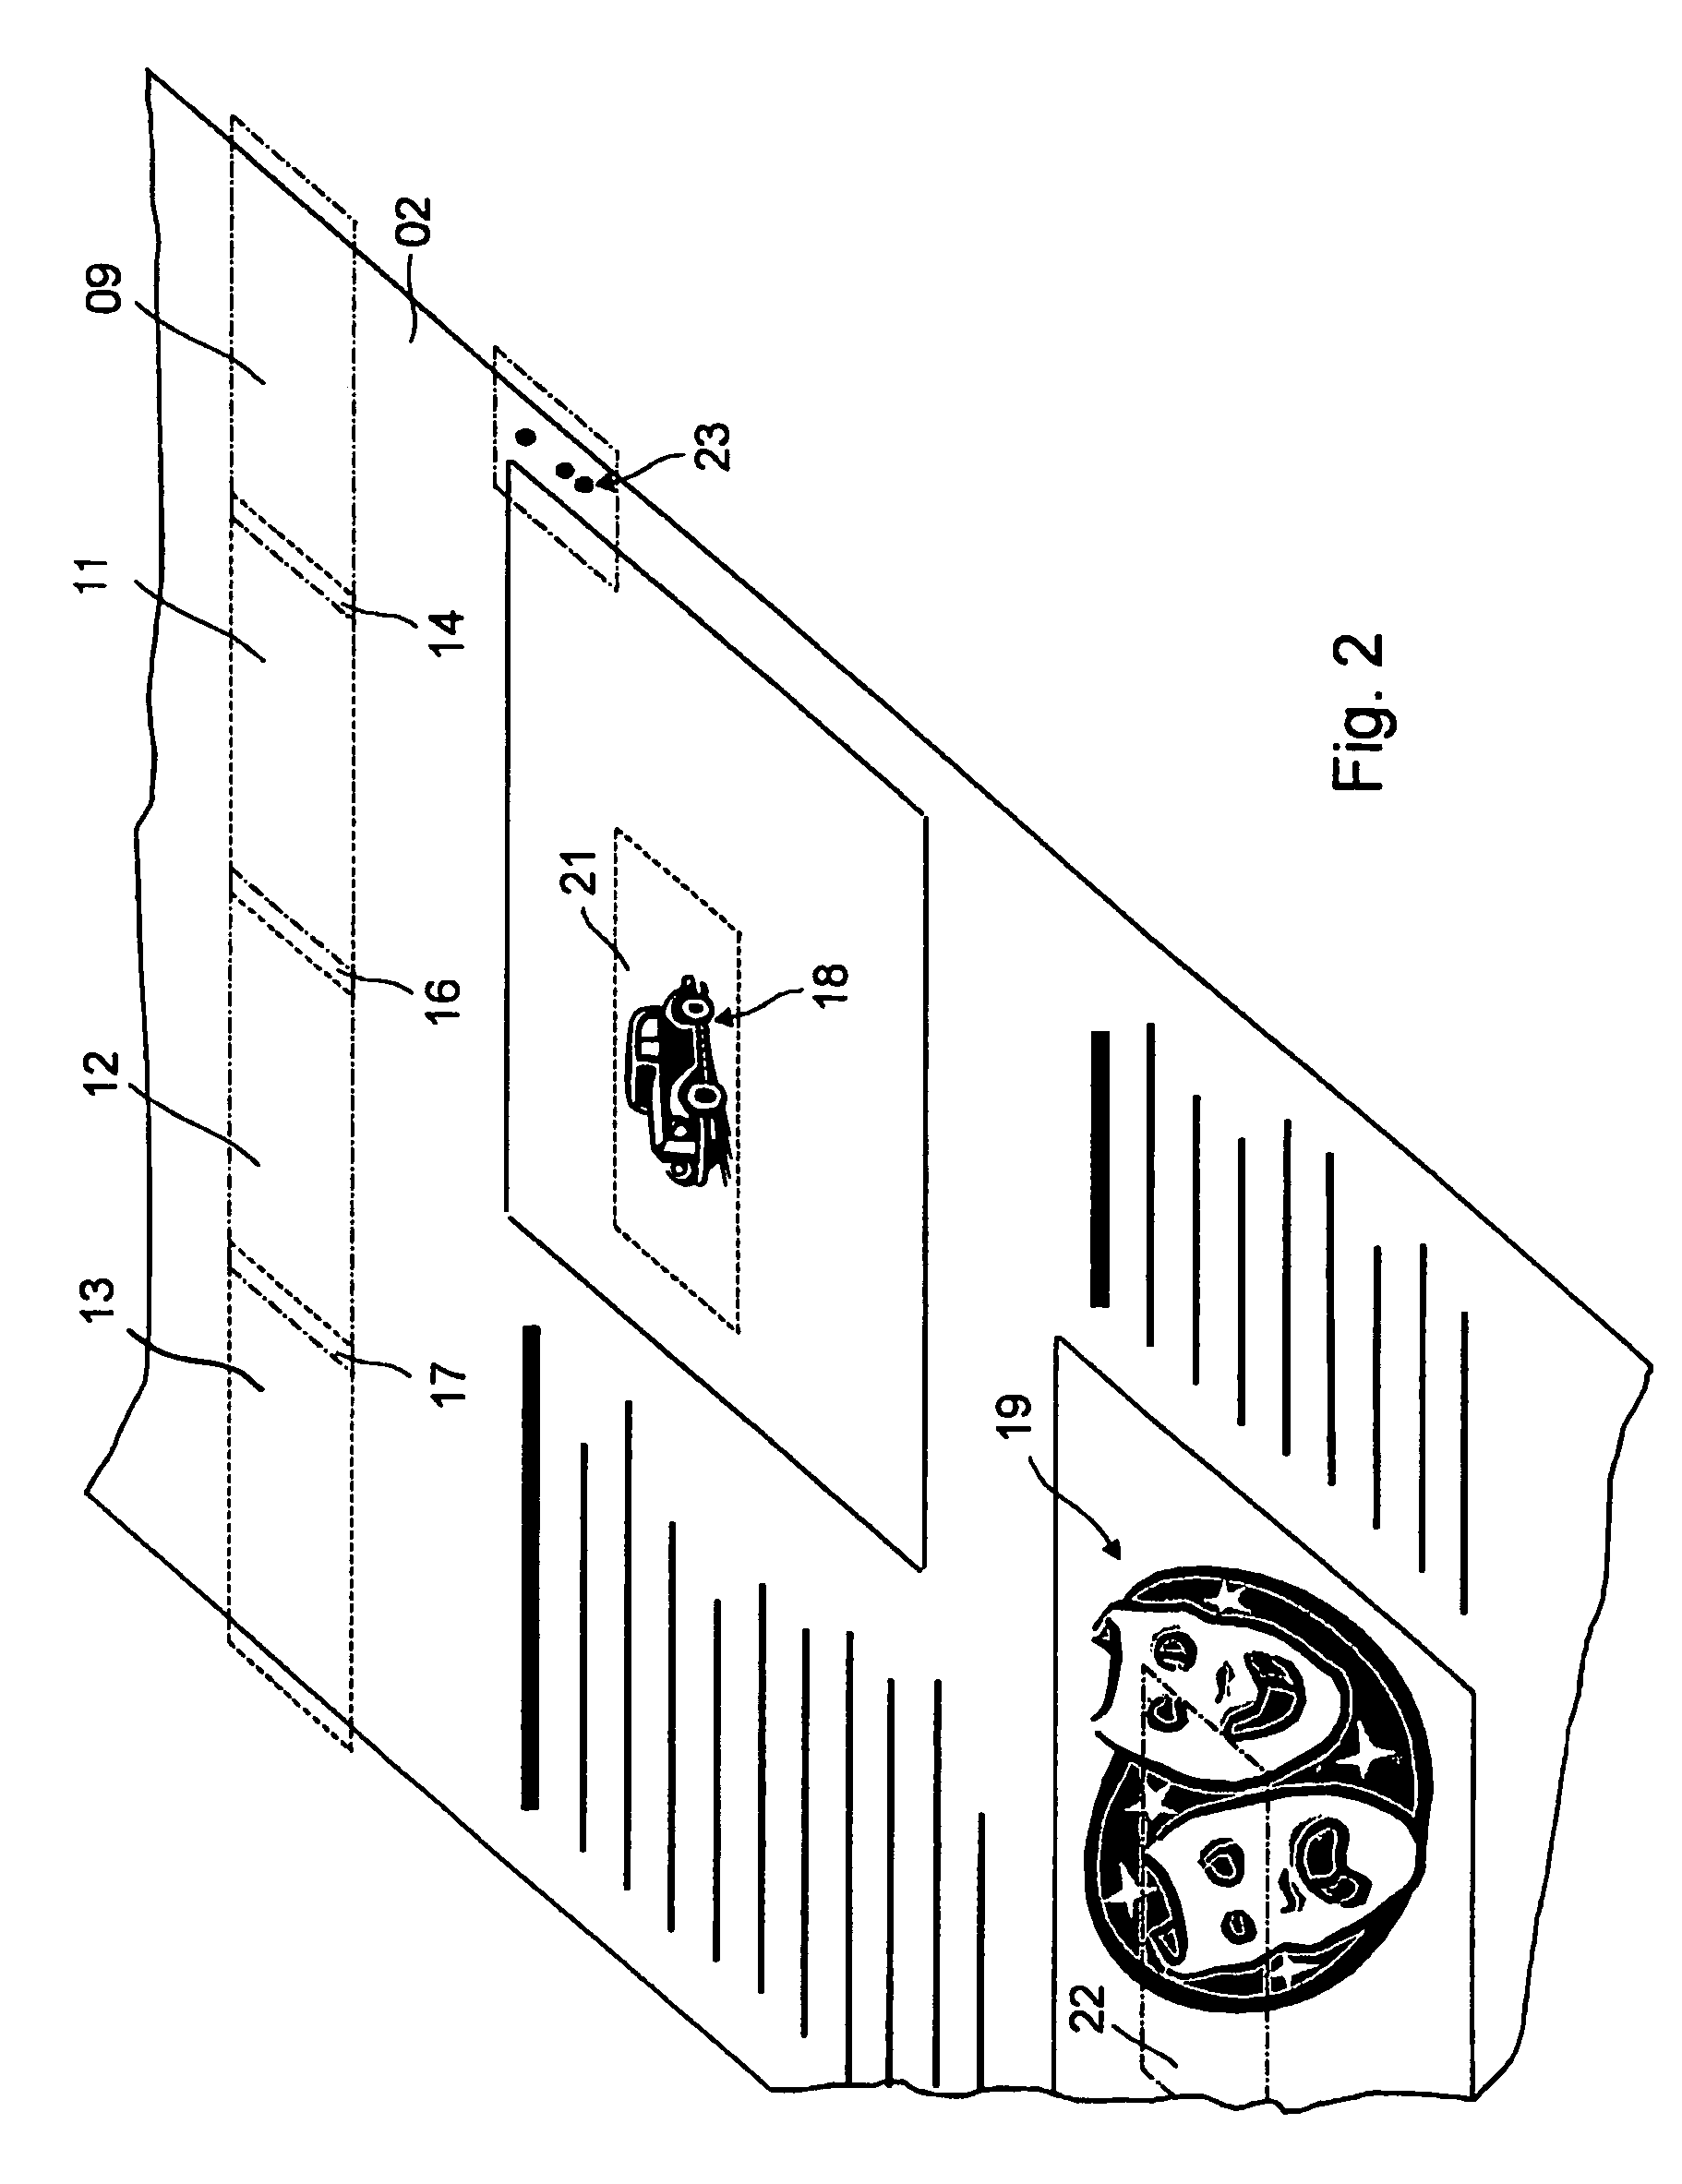 Electronic image evaluating device and evalution method